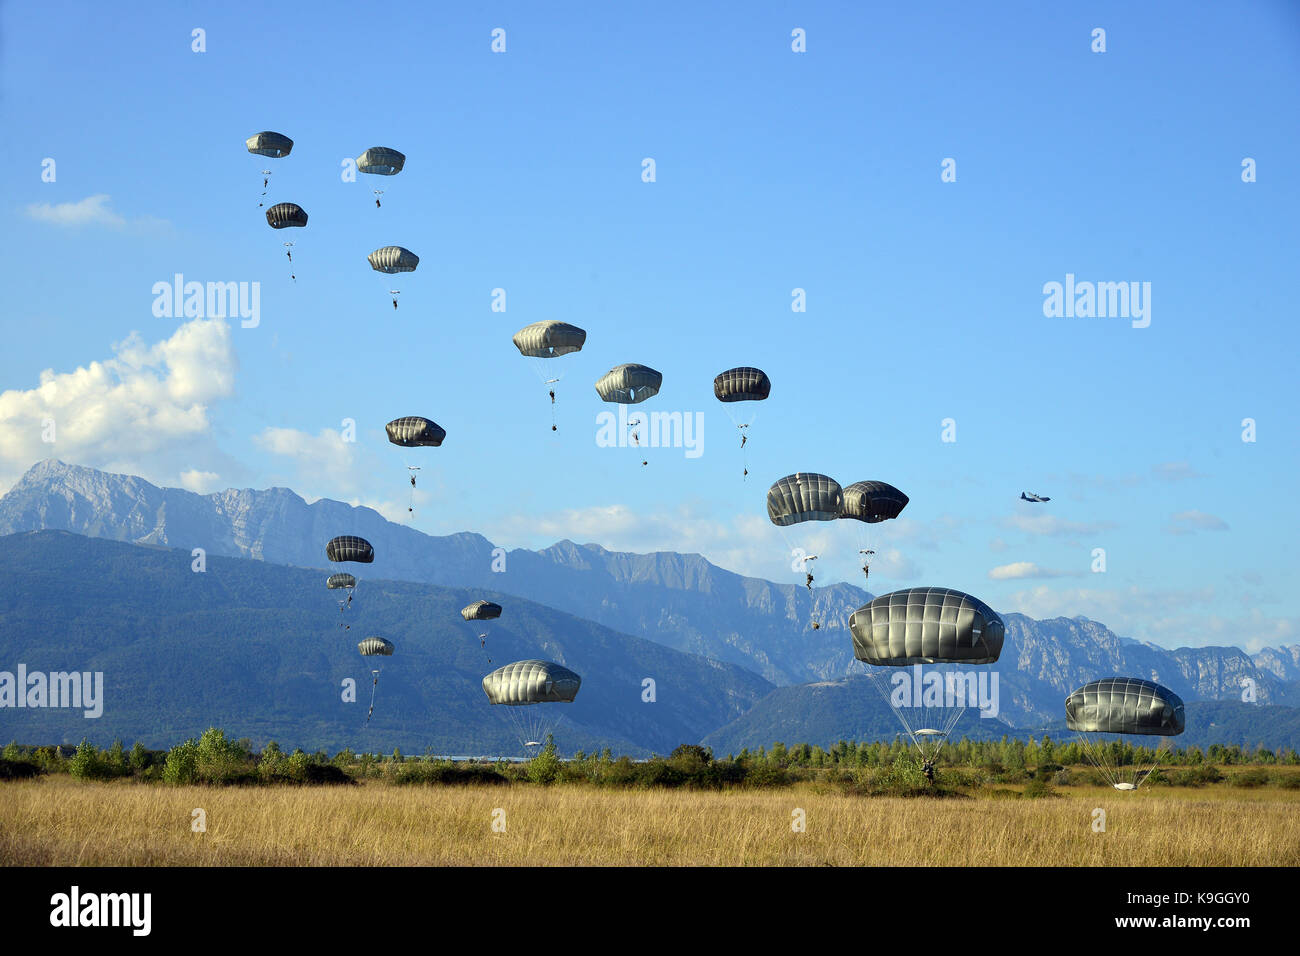 U.S. Army Paratroopers assigned to the Brigade Support Battalion, Stock Photo